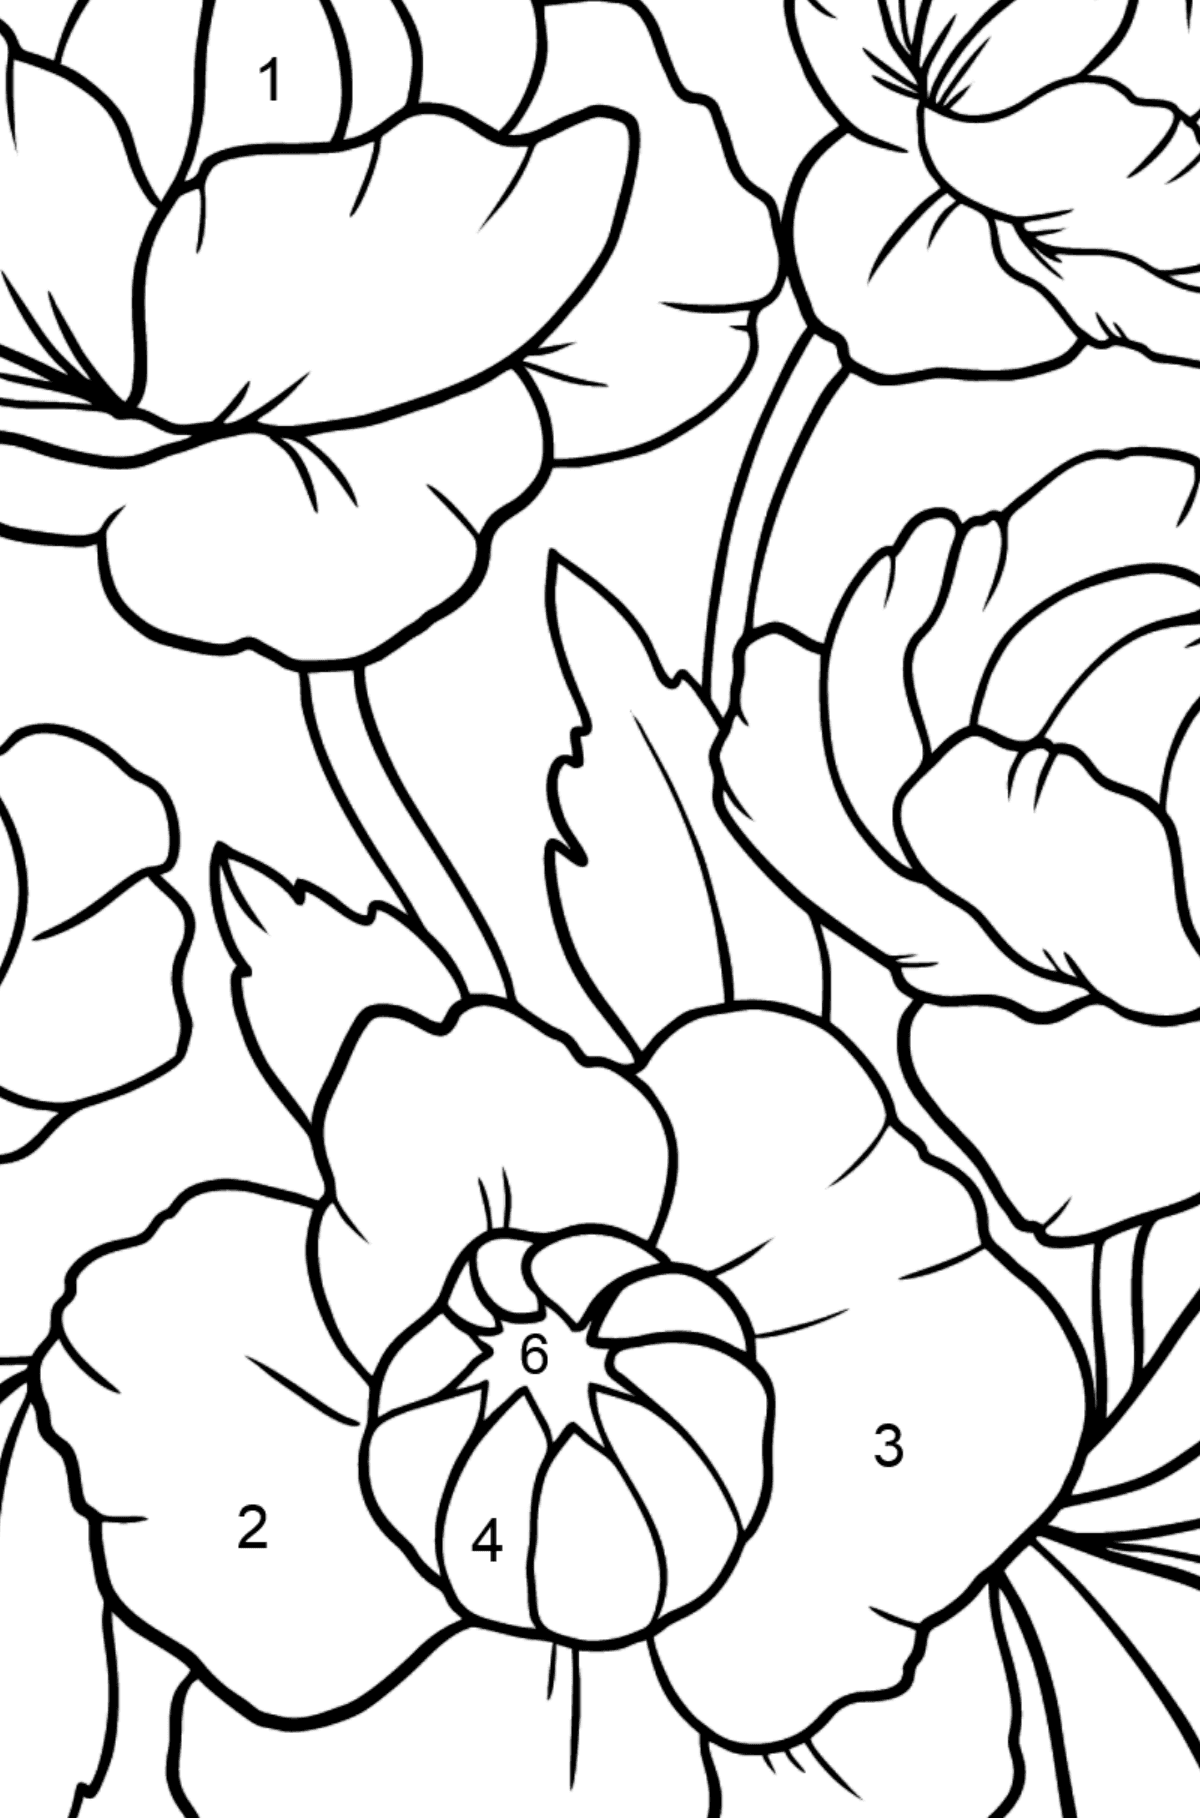 Beautiful Flower Coloring Page - A Red and Pink Globeflower - Coloring by Numbers for Kids